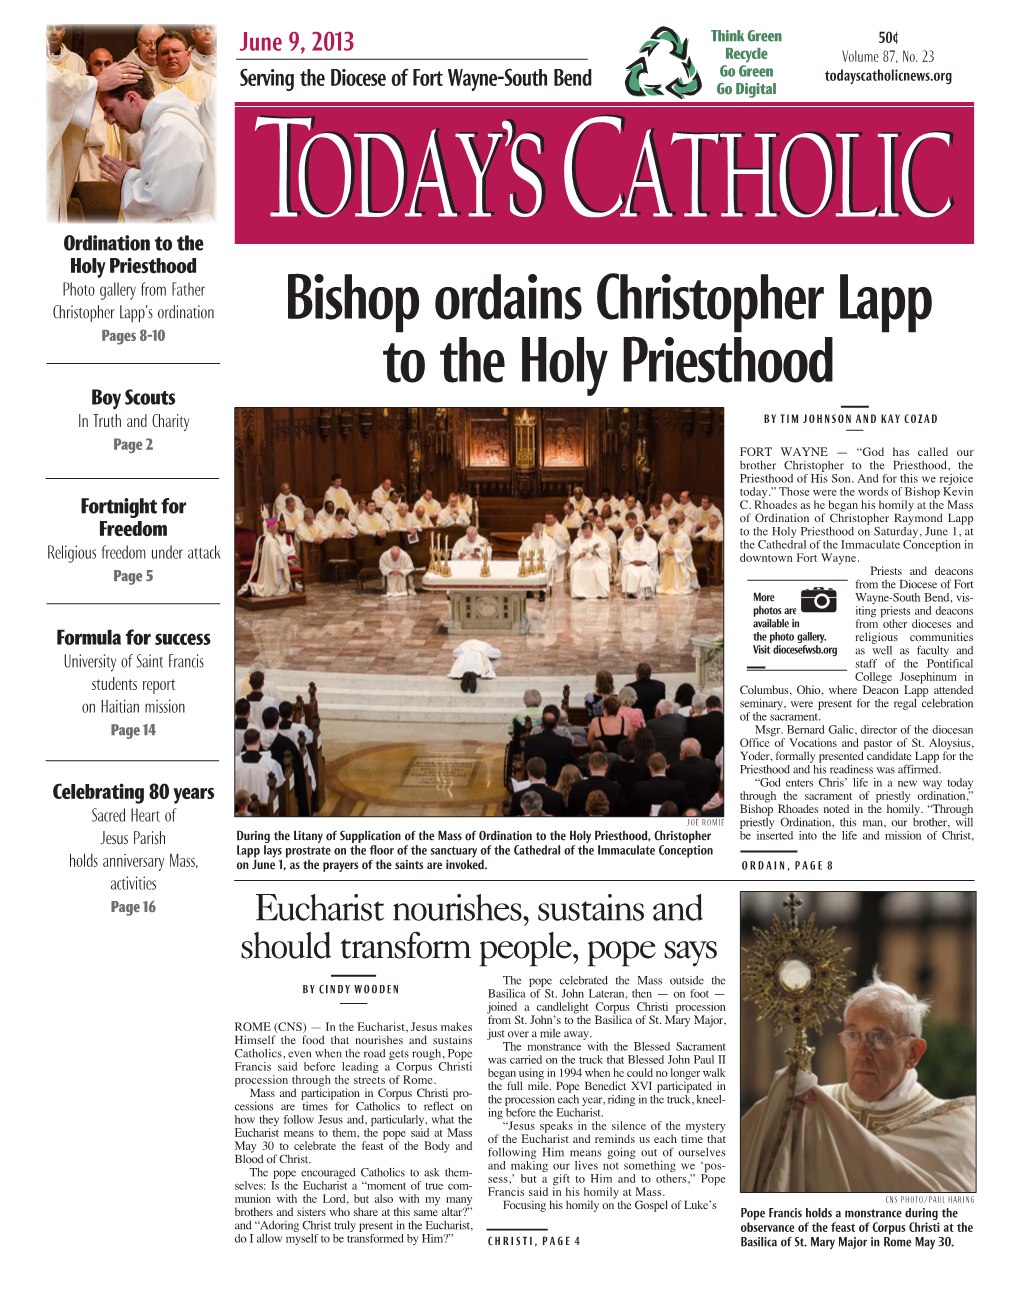 Bishop Ordains Christopher Lapp to the Holy Priesthood